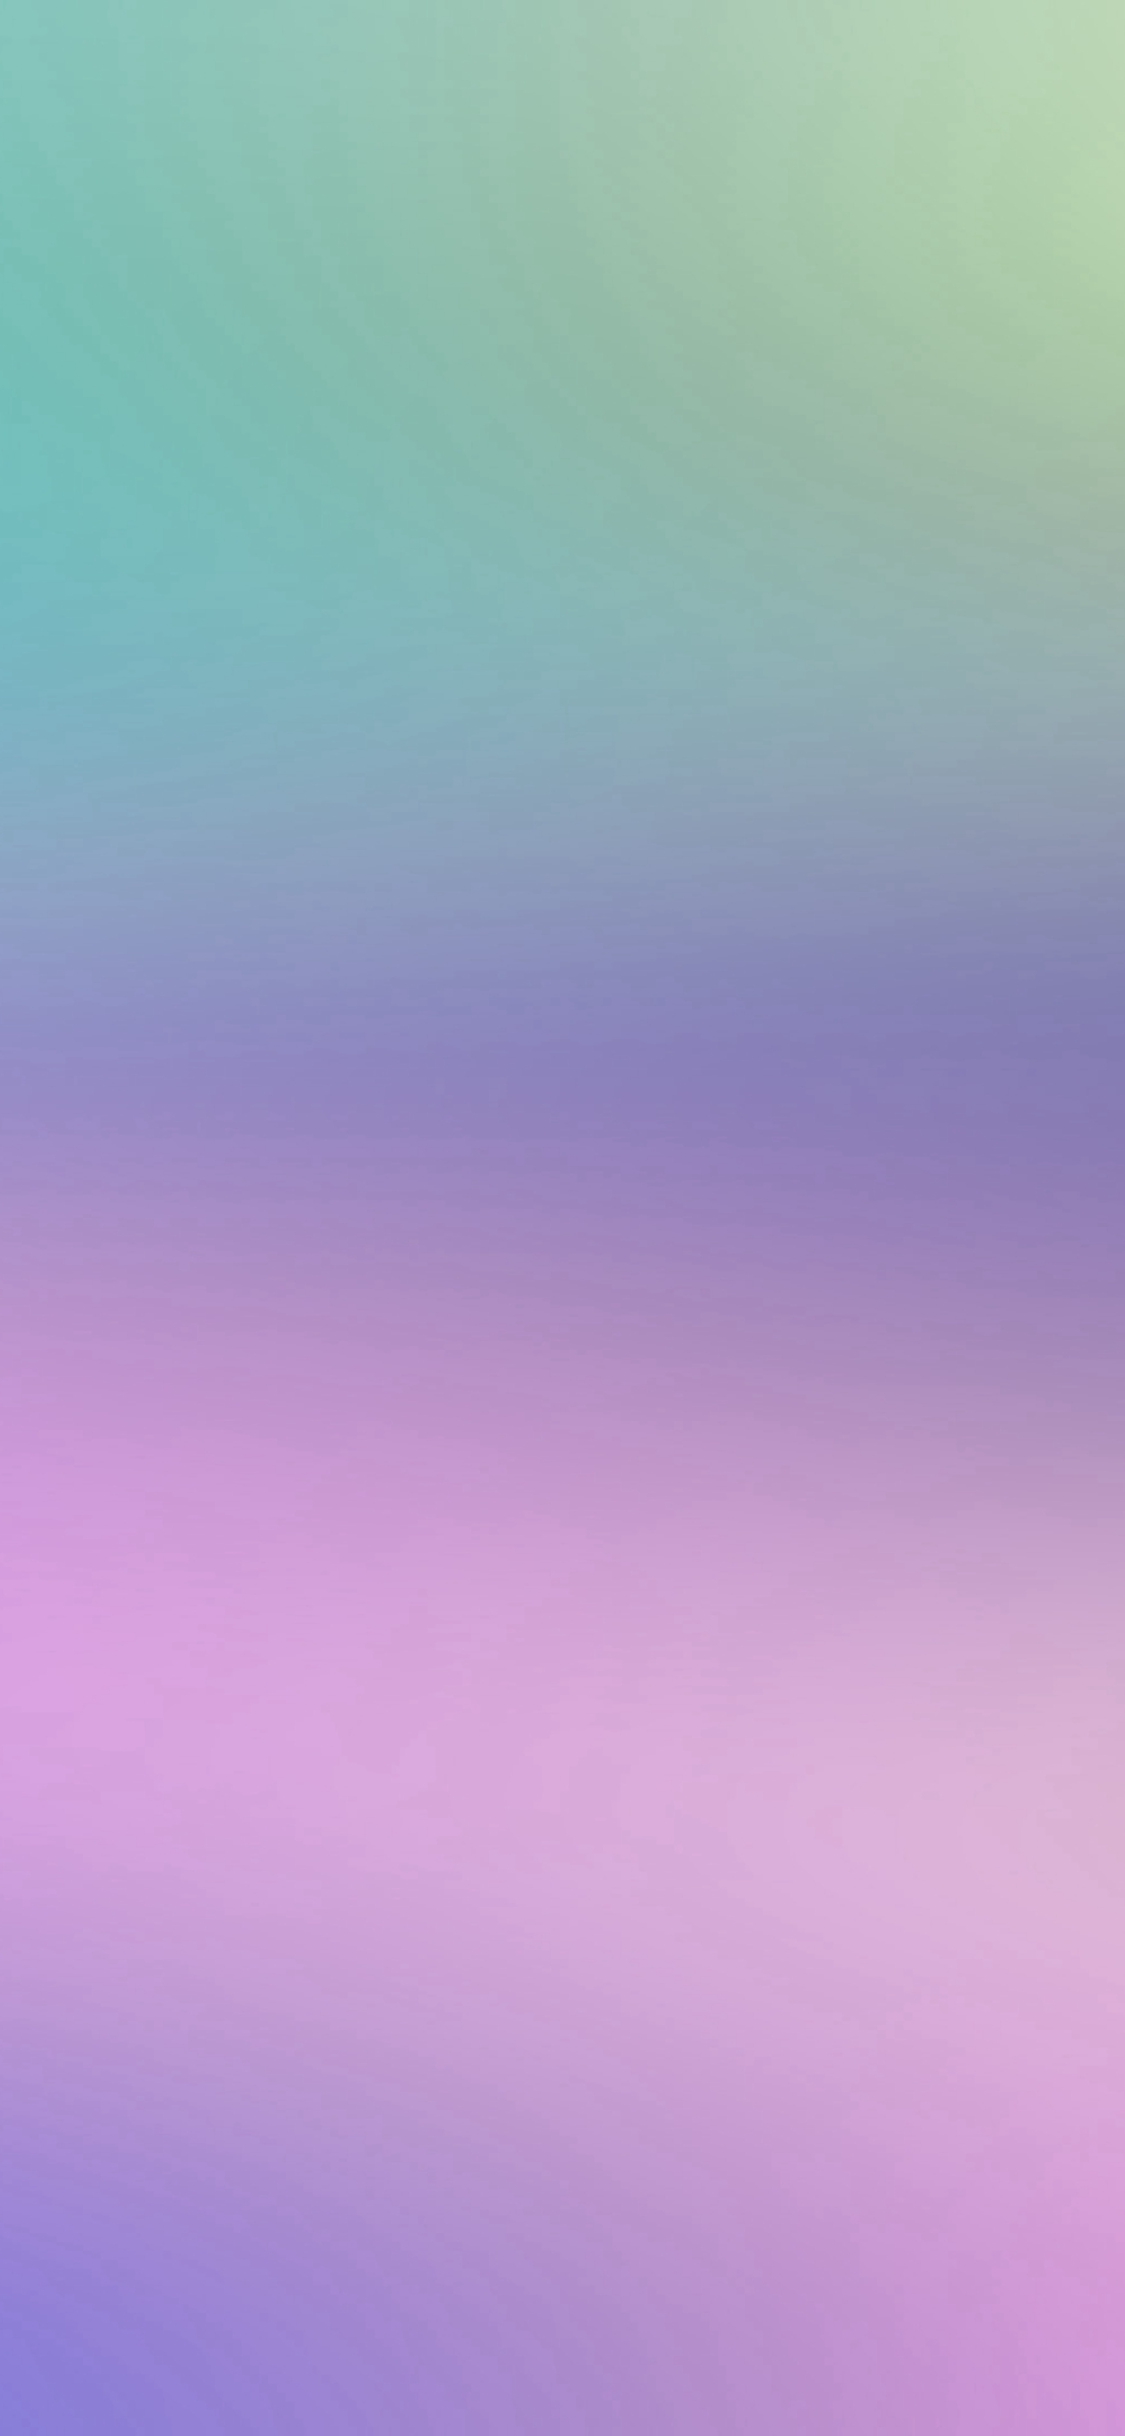 Blue And Purple Blur Gradation Background Iphone X Wallpapers Free Download